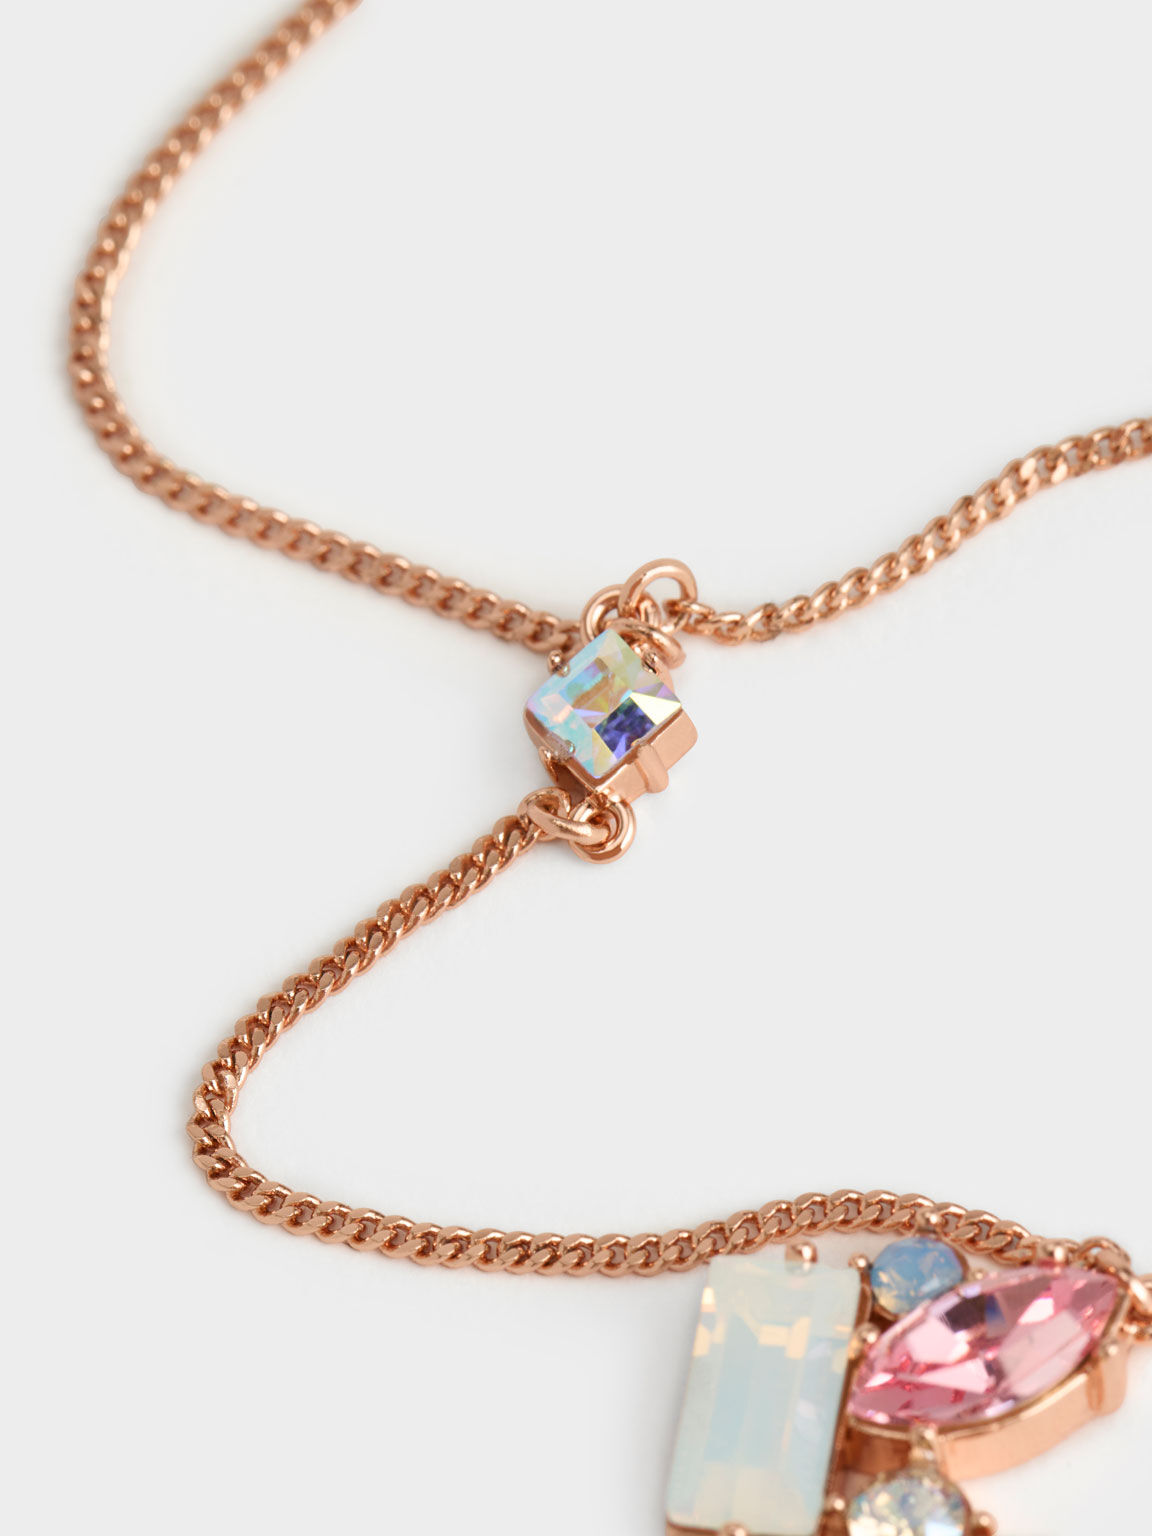 Crystal-Embellished Double Chain Necklace, Rose Gold, hi-res